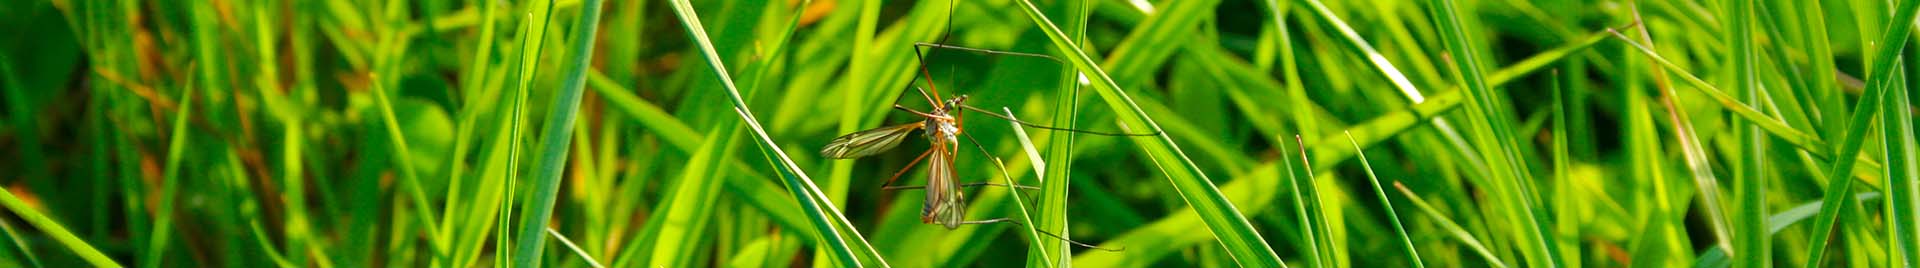 A category header image of a mosquito on a blade of grass